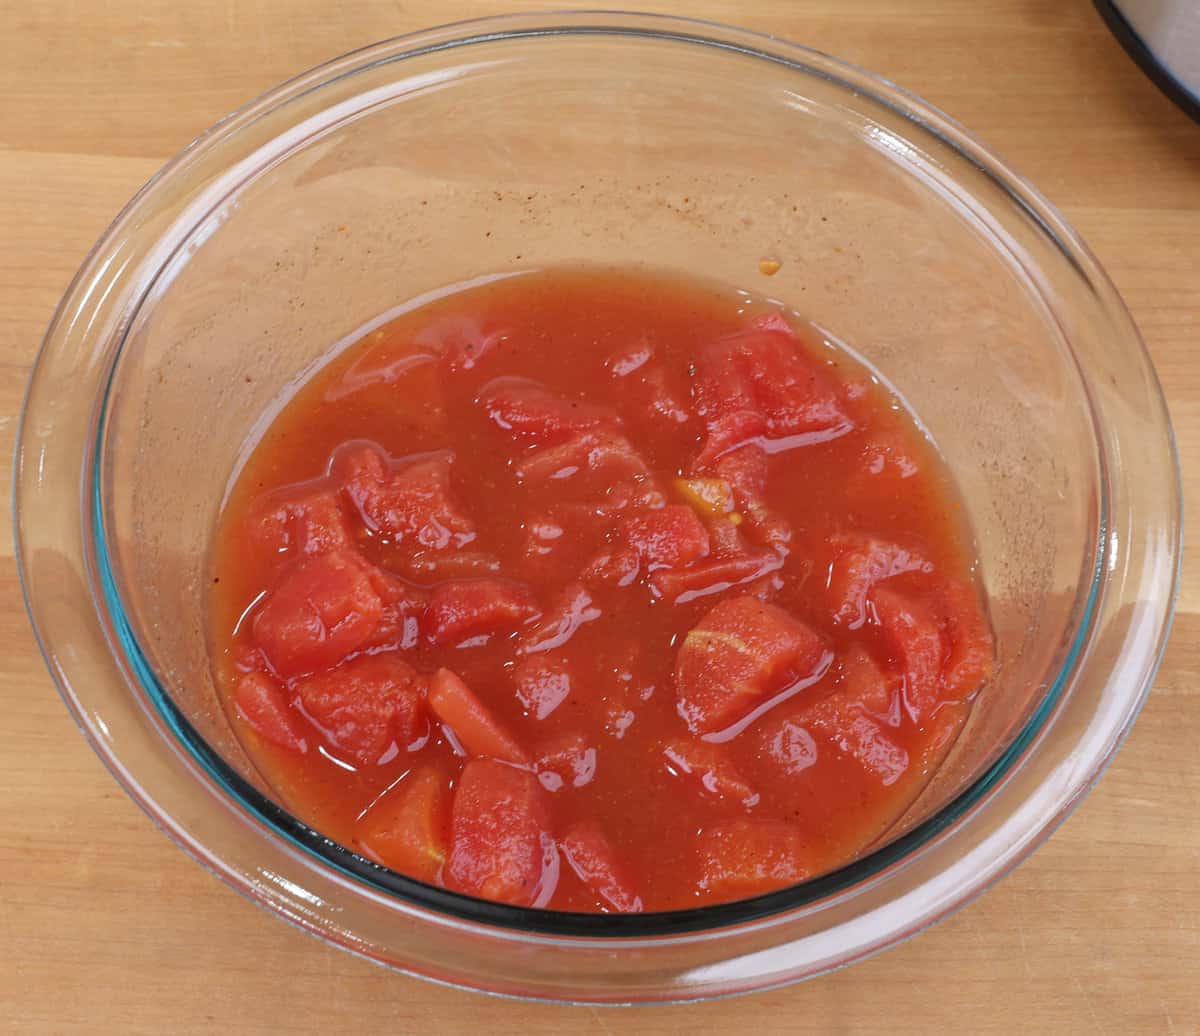 canned diced tomatoes and seasonings in a small bowl.